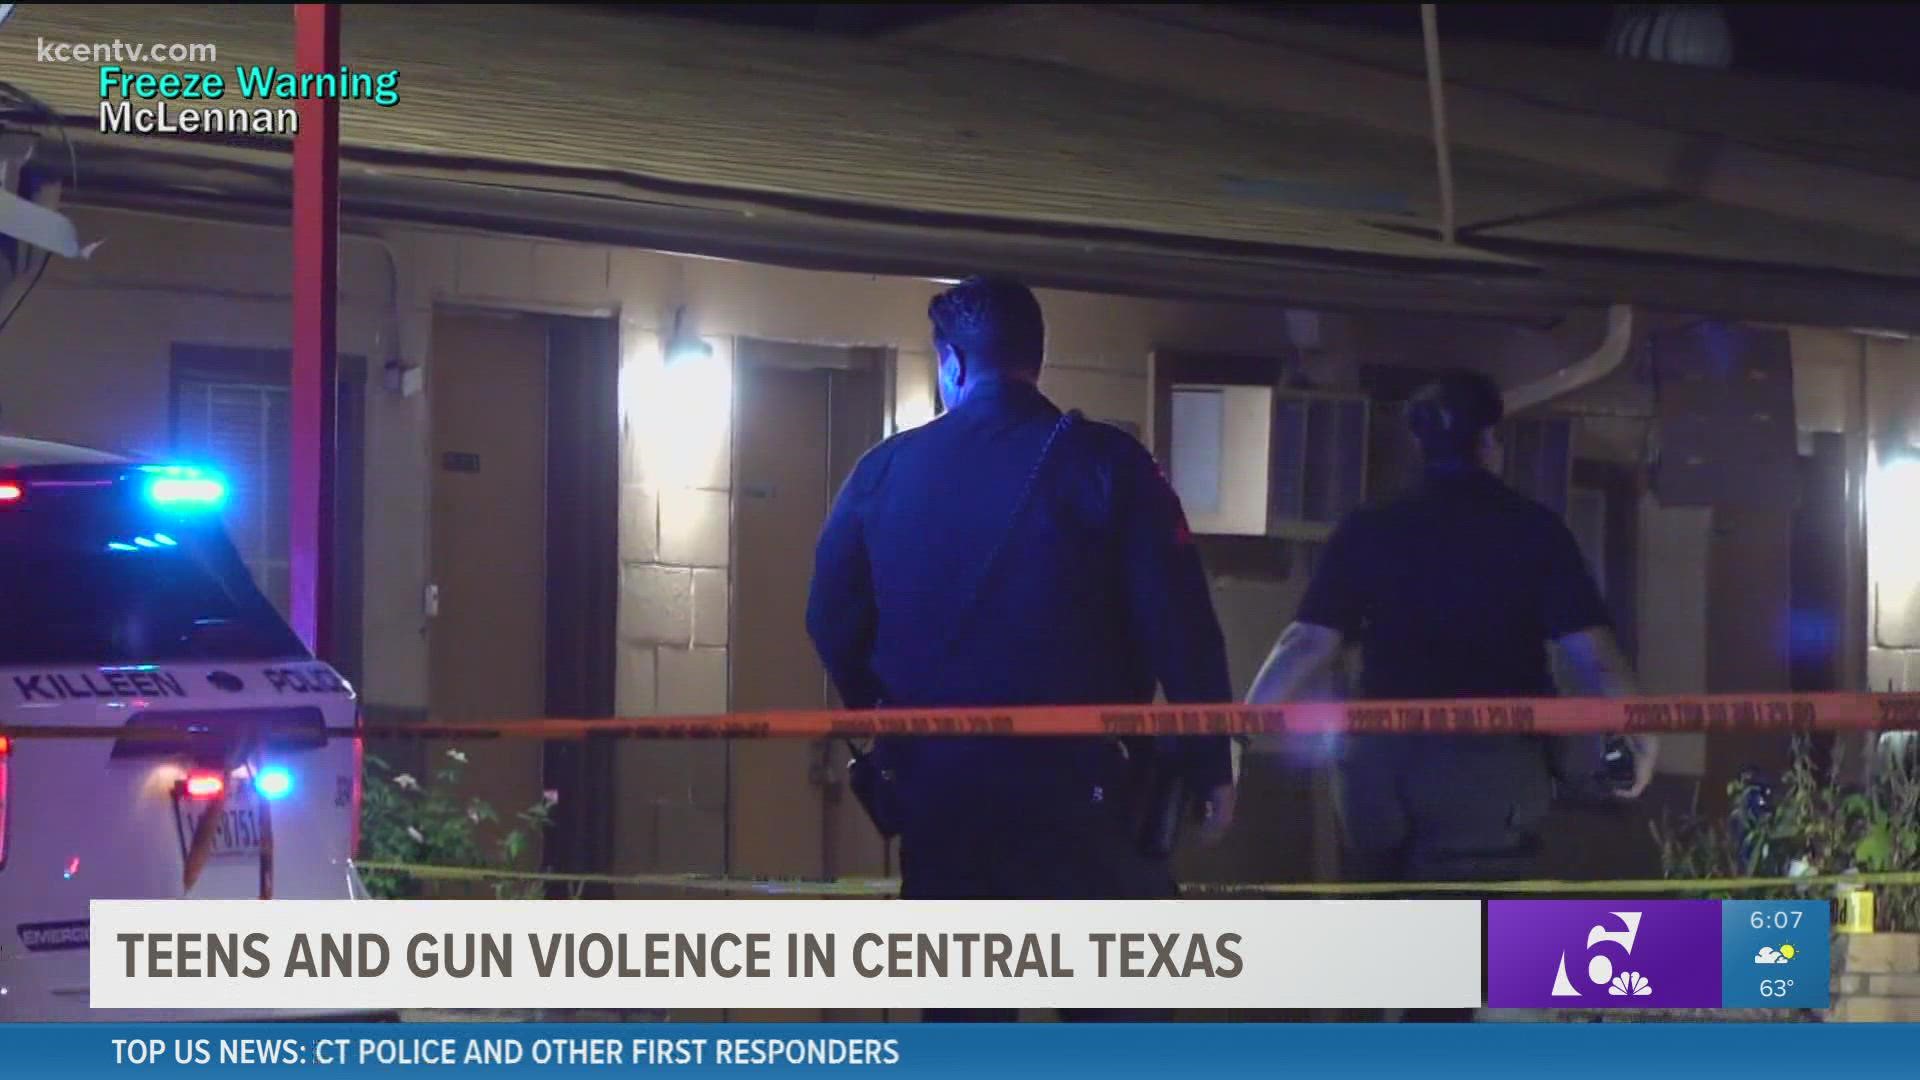 In Killeen, gang activity is growing. Jasmin Caldwell has the latest on how this has affected the community.